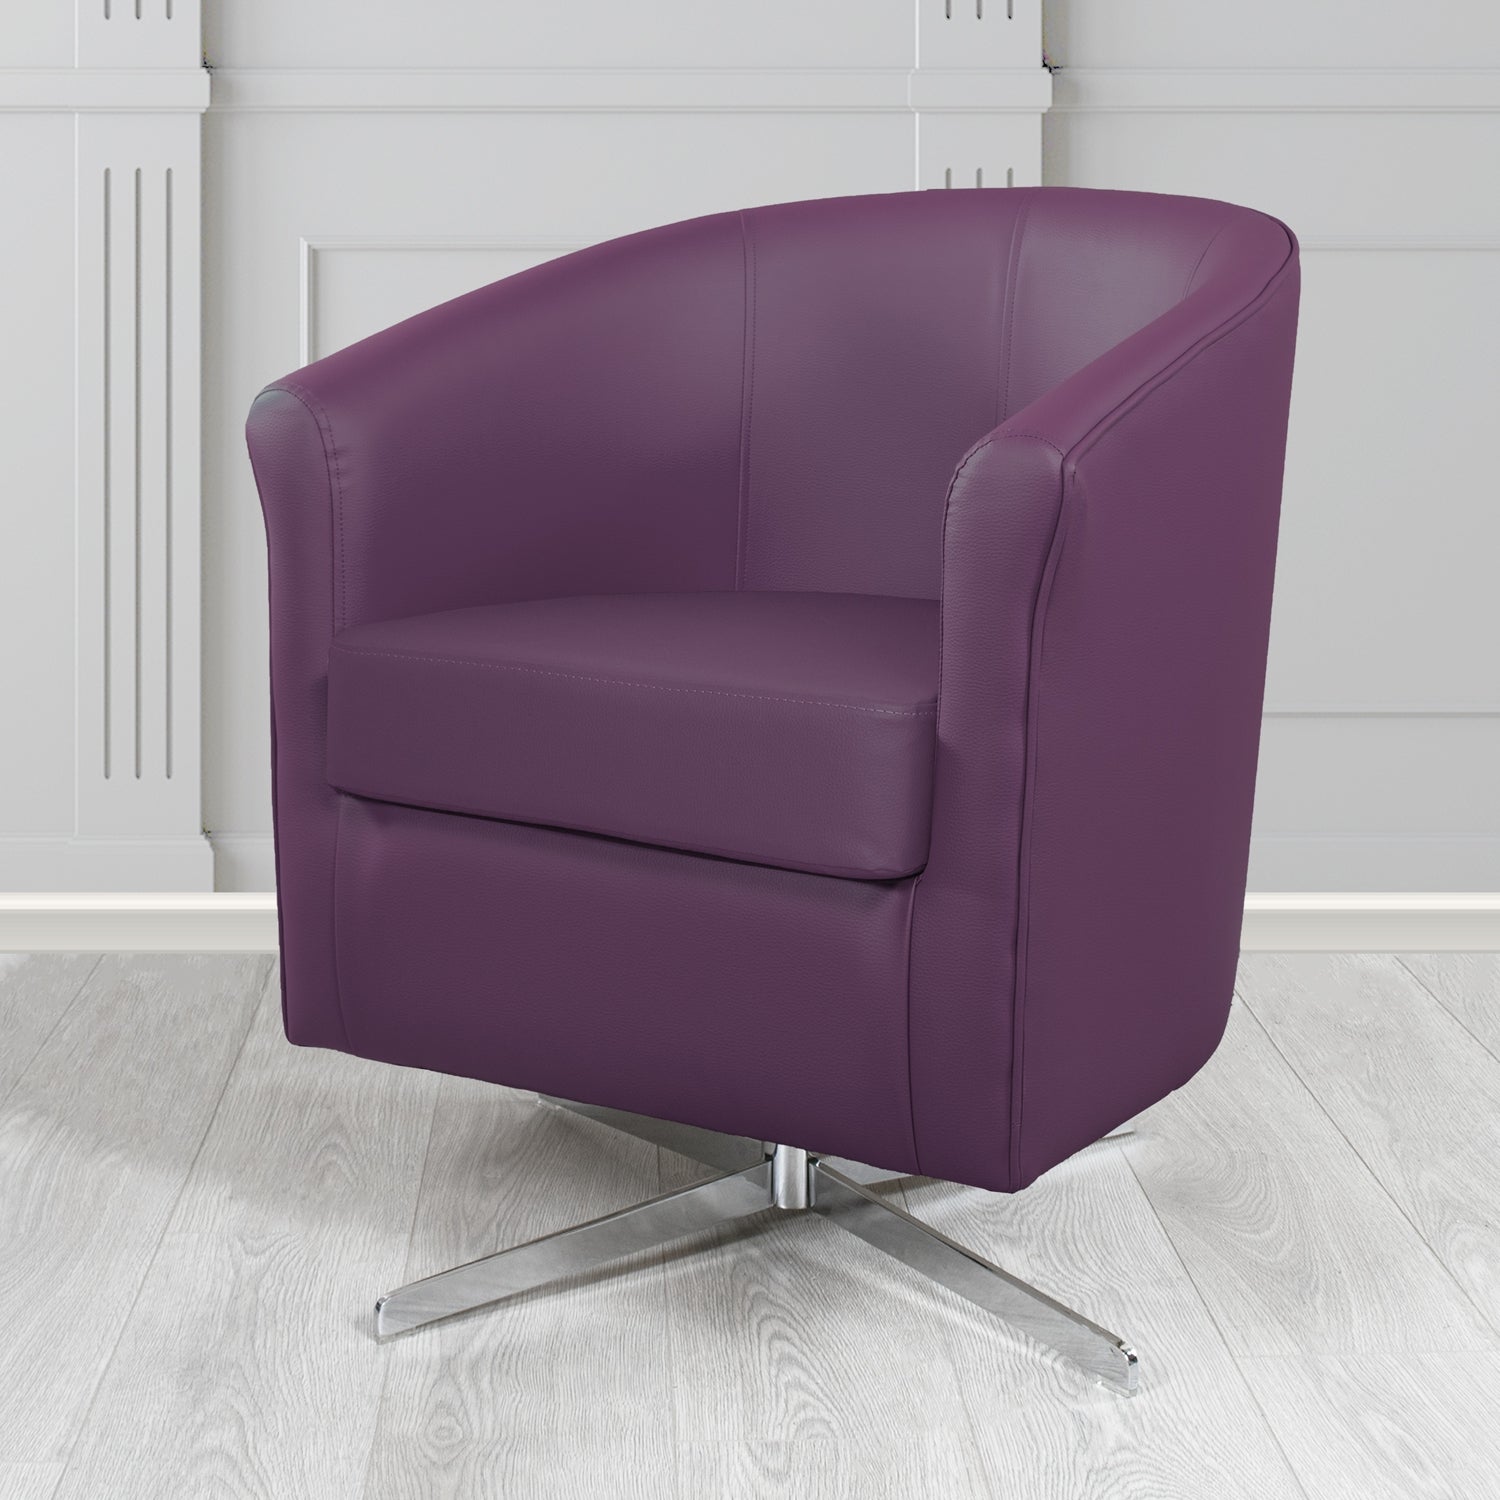 Cannes Swivel Tub Chair in Just Colour Damson Crib 5 Faux Leather